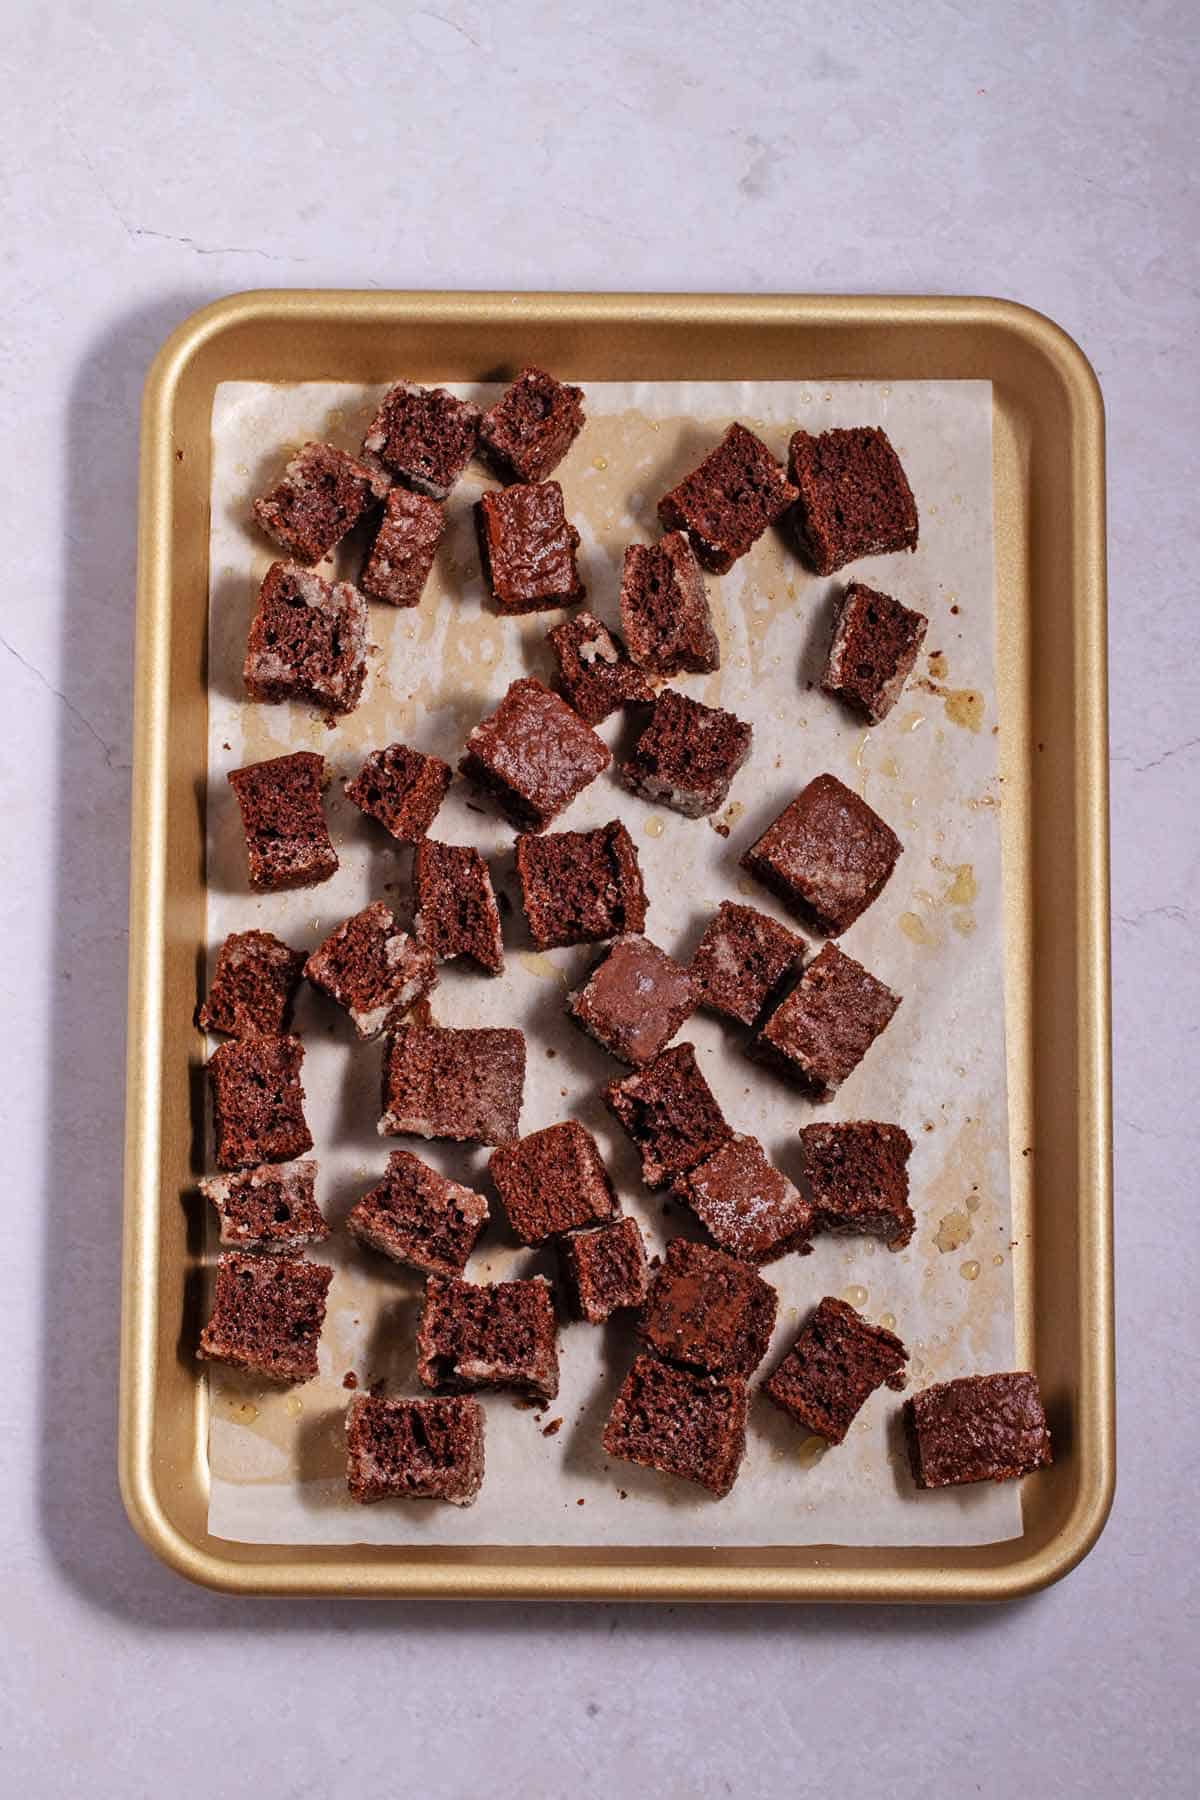 Sheet pan with baked chocolate cake croutons.